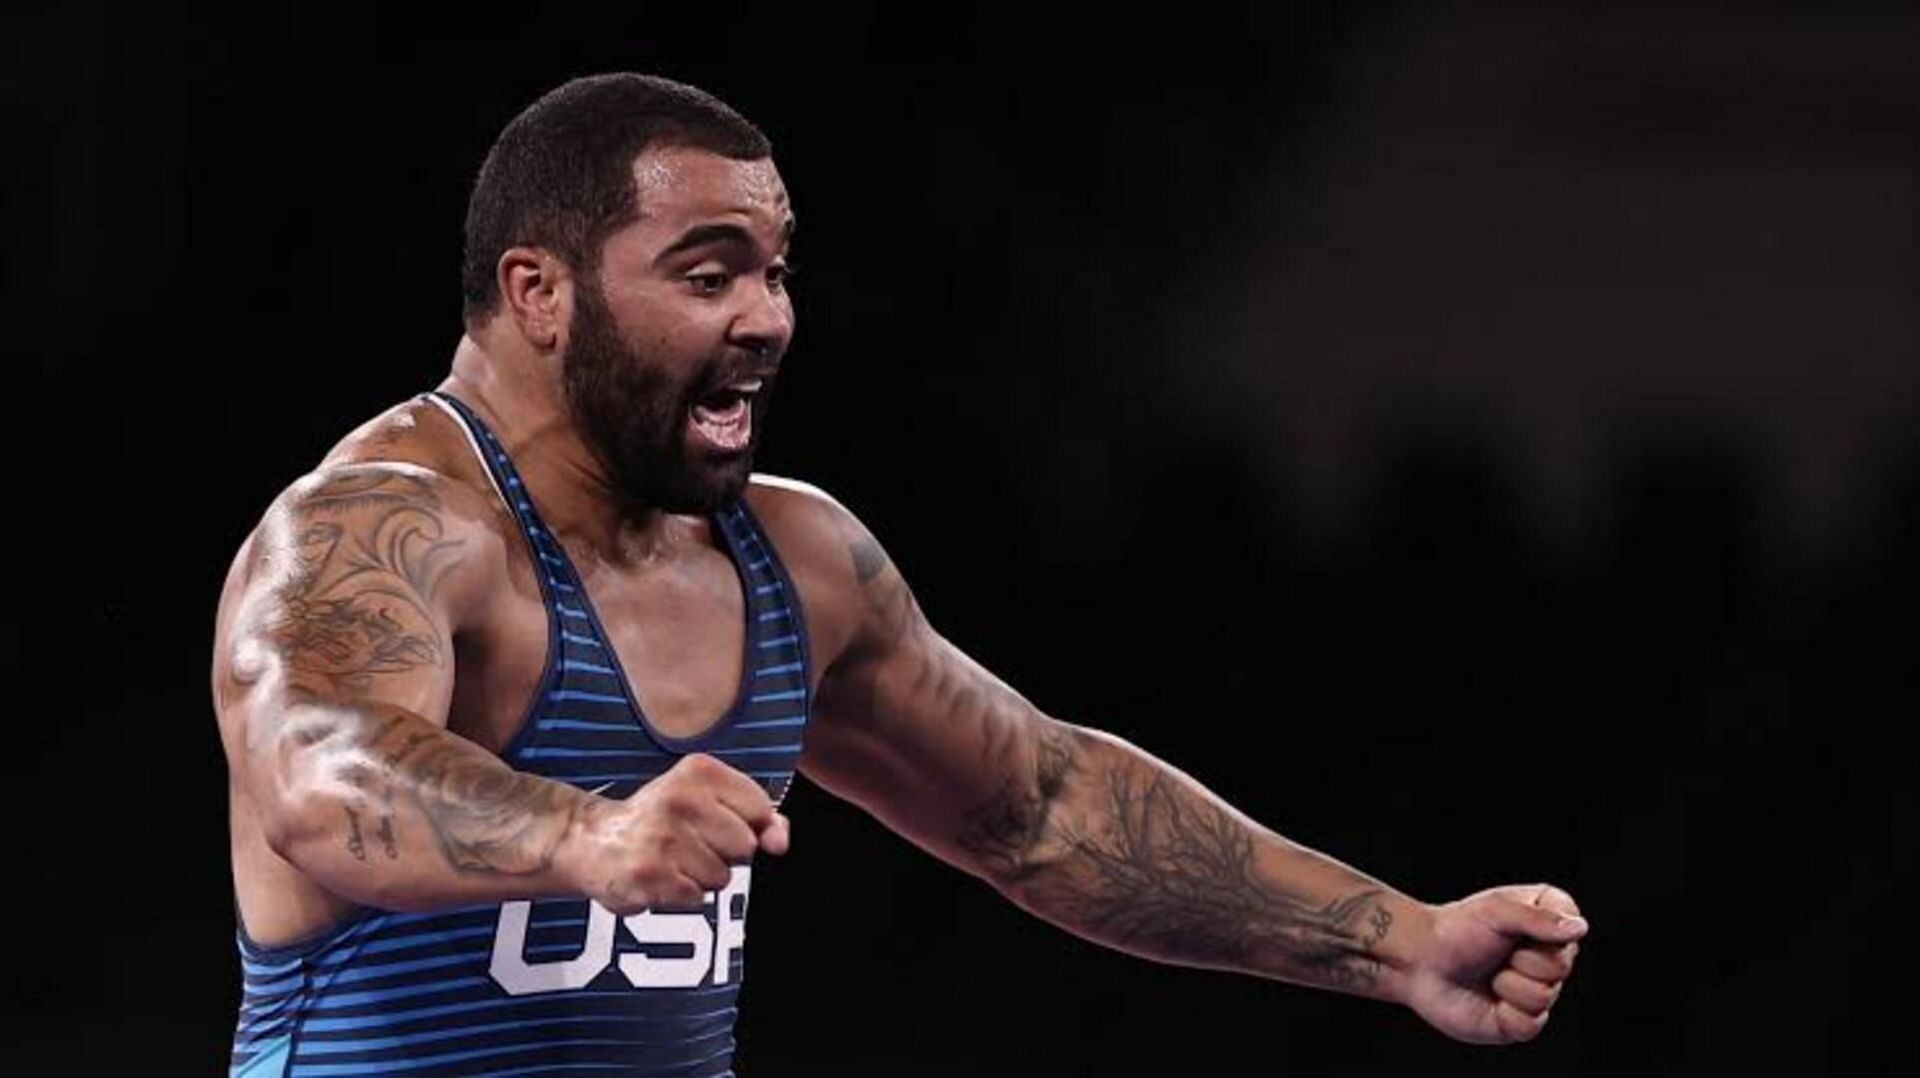 Gable Steveson won the Olympic Gold Medal in 2021.